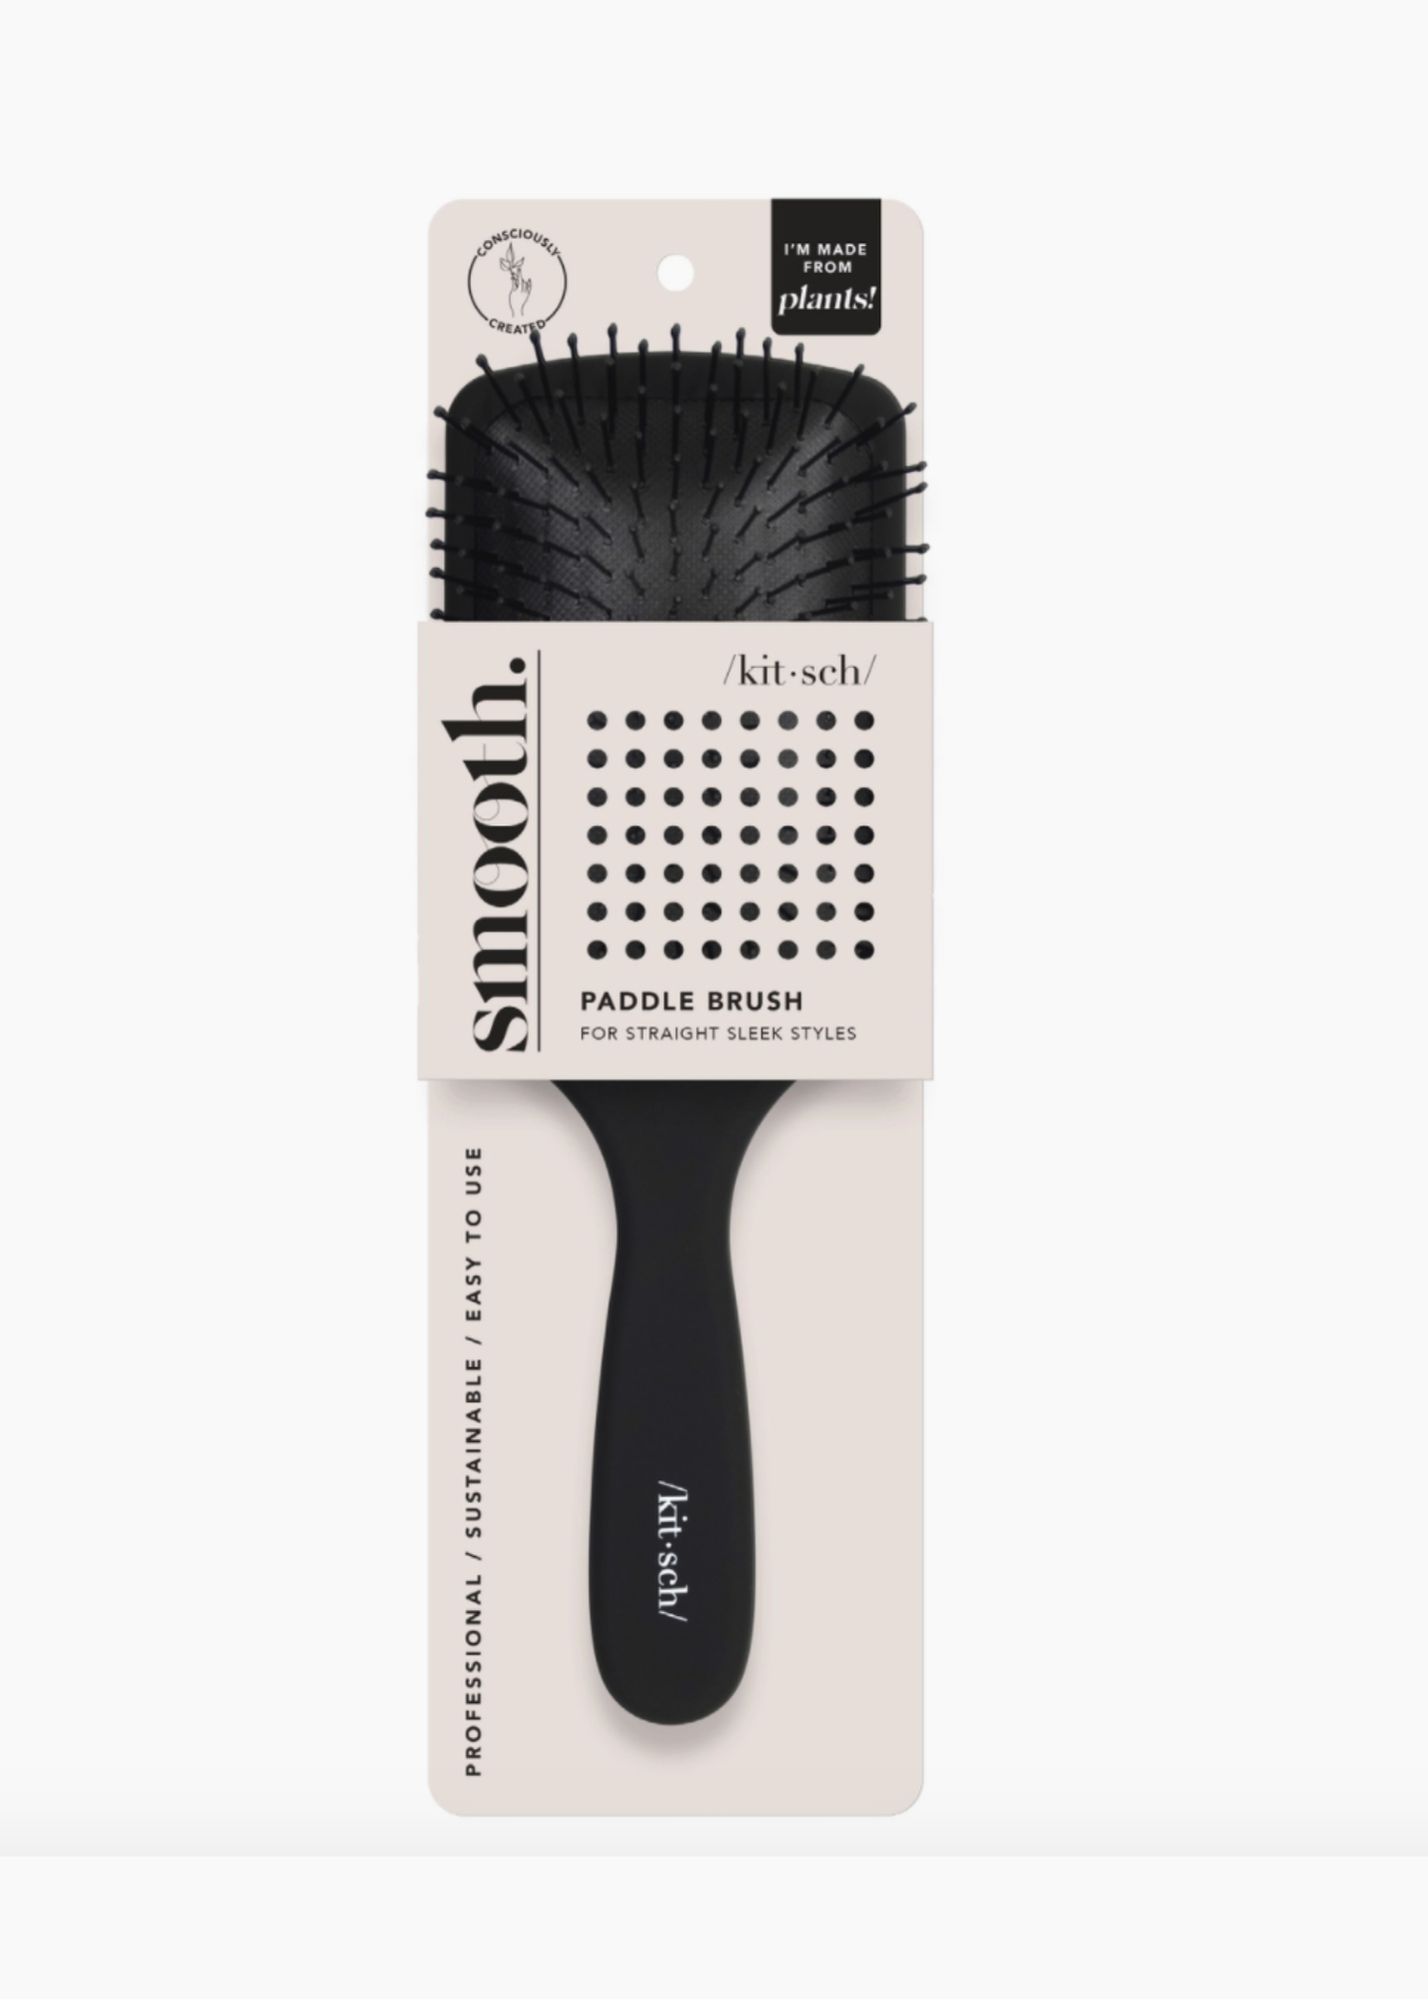 Paddle Handle Brush Accessories Kitsch